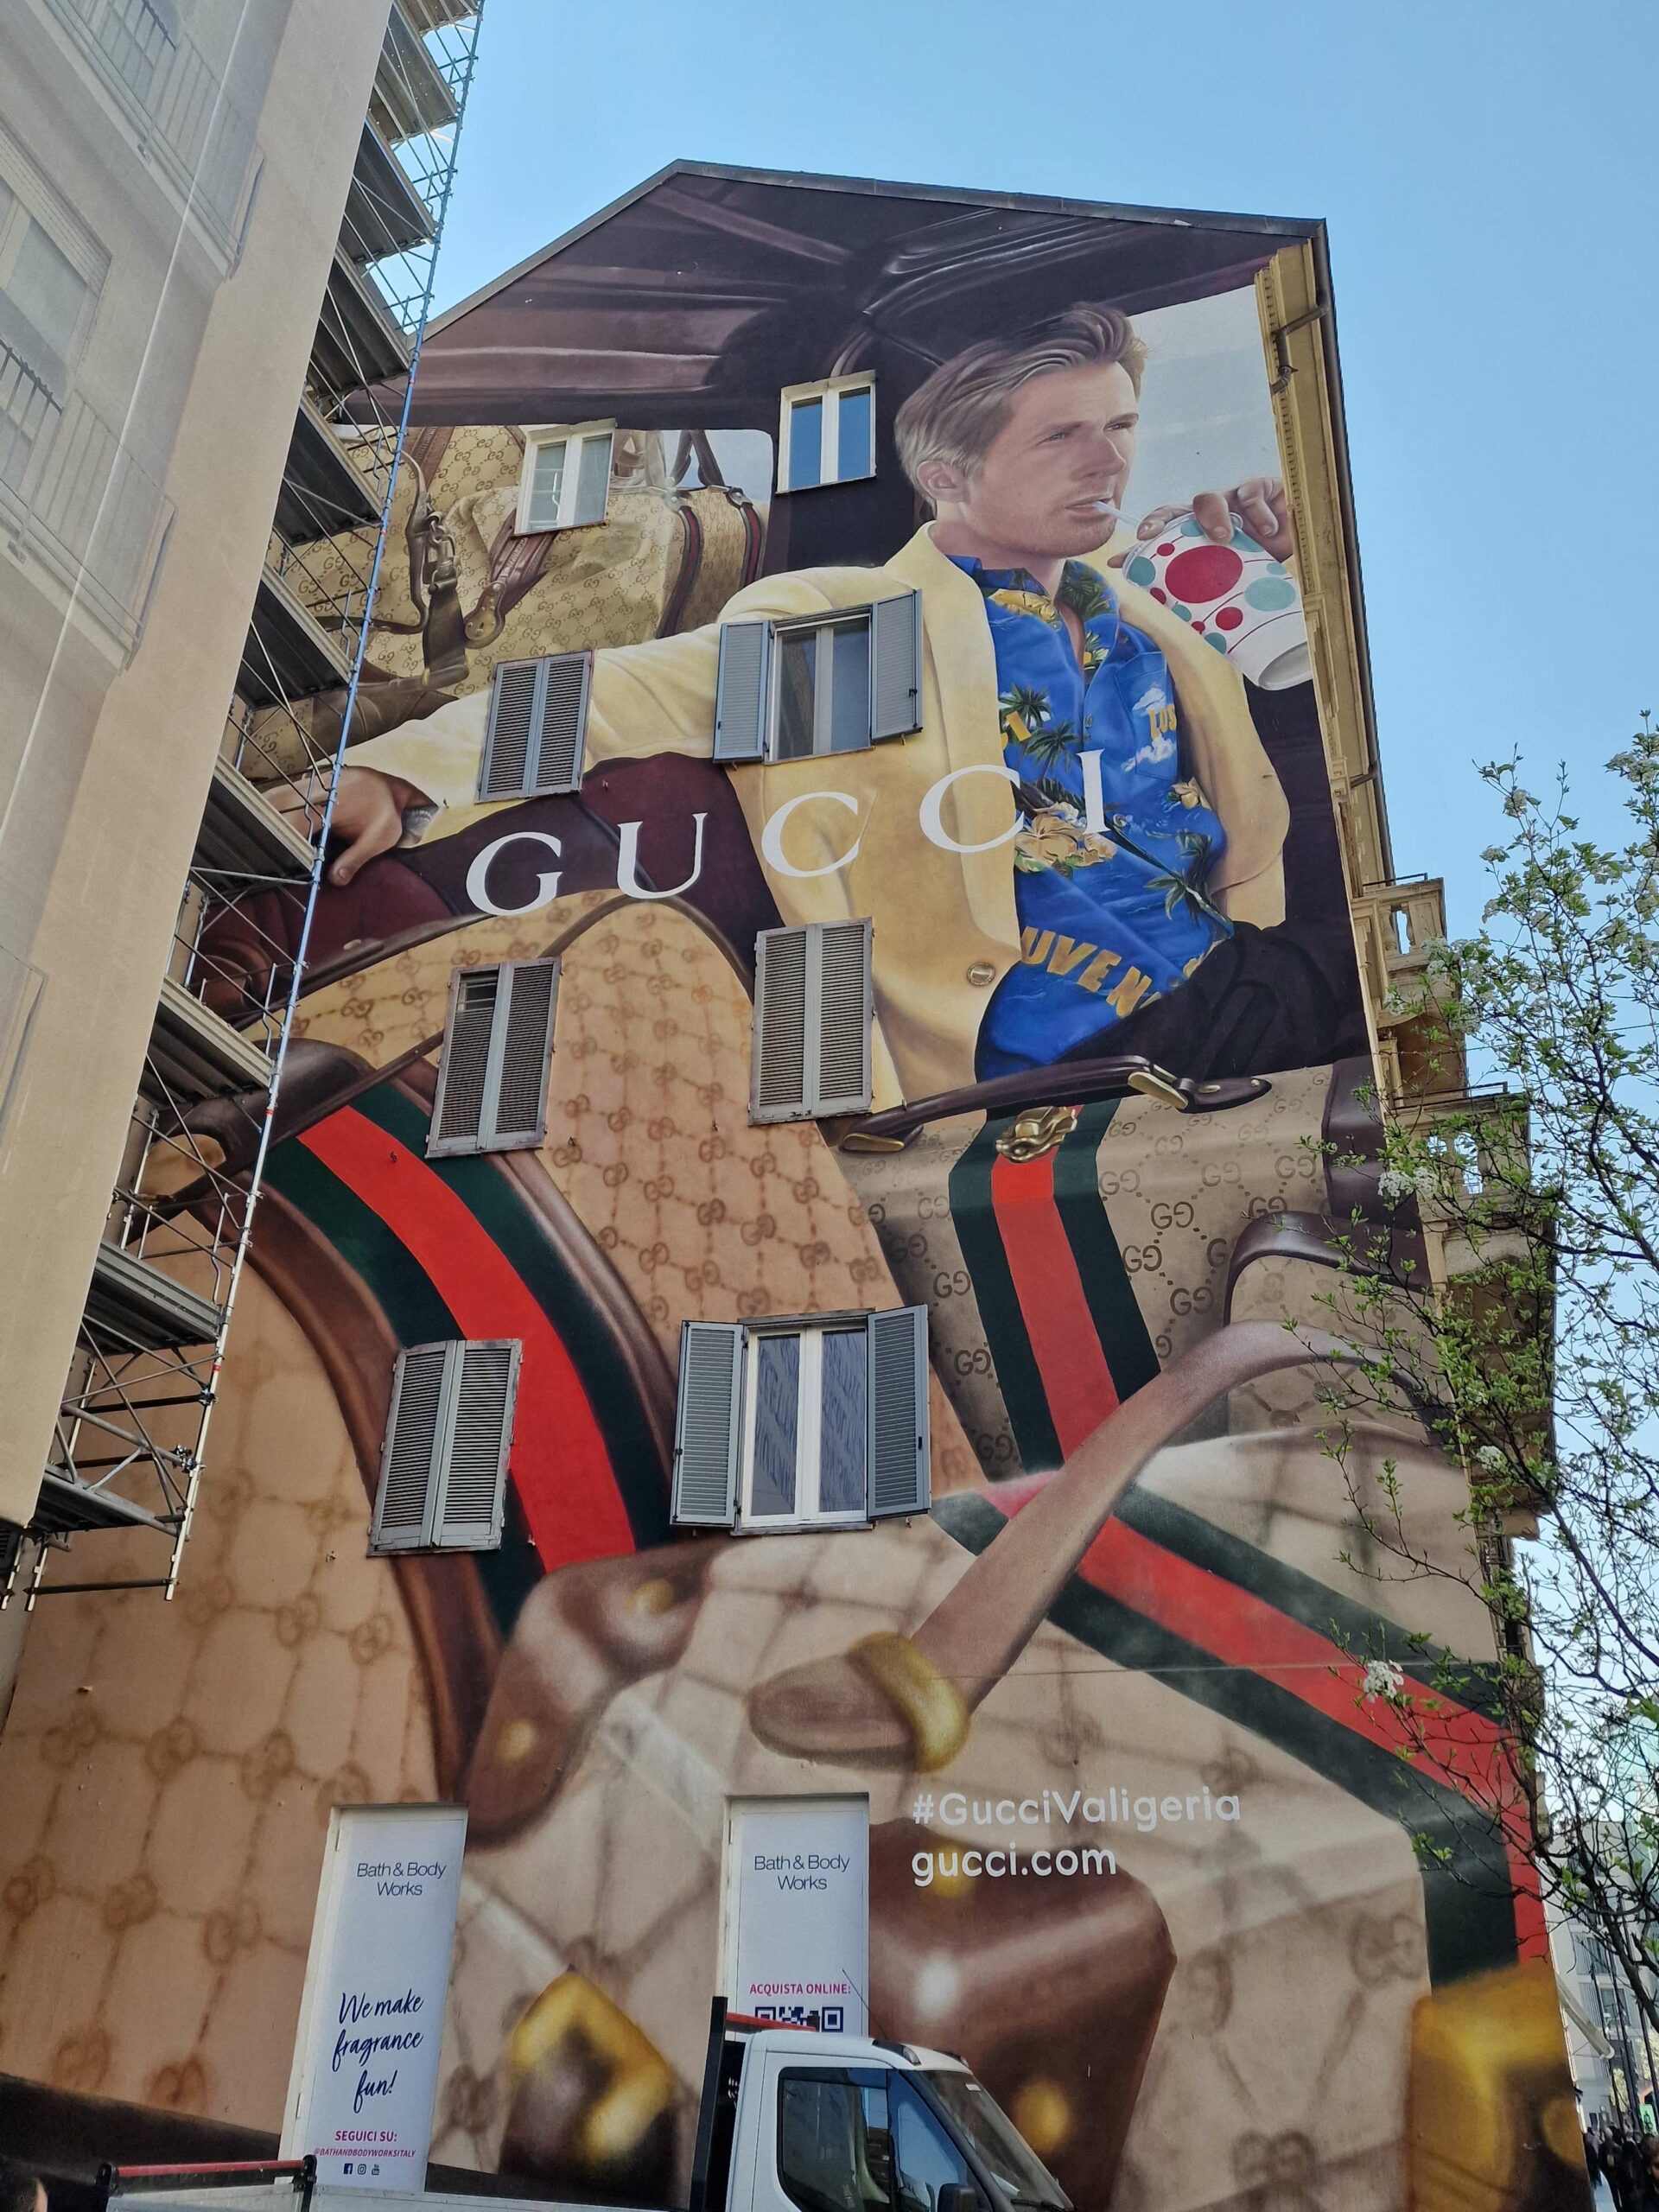 Gucci: From Leather Goods to Digital Fashion Success